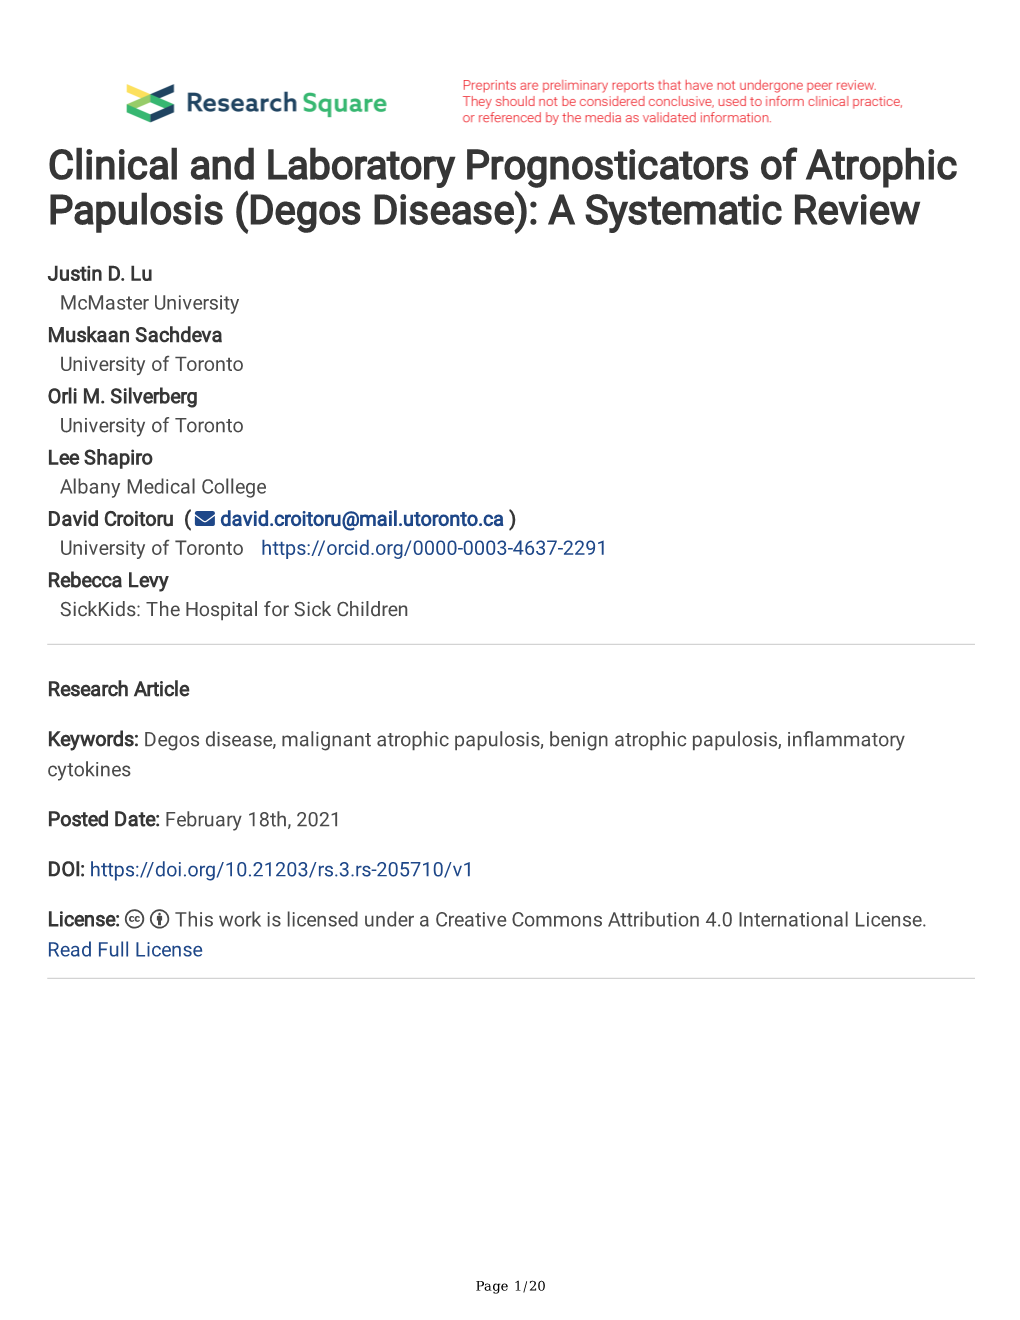 Degos Disease): a Systematic Review